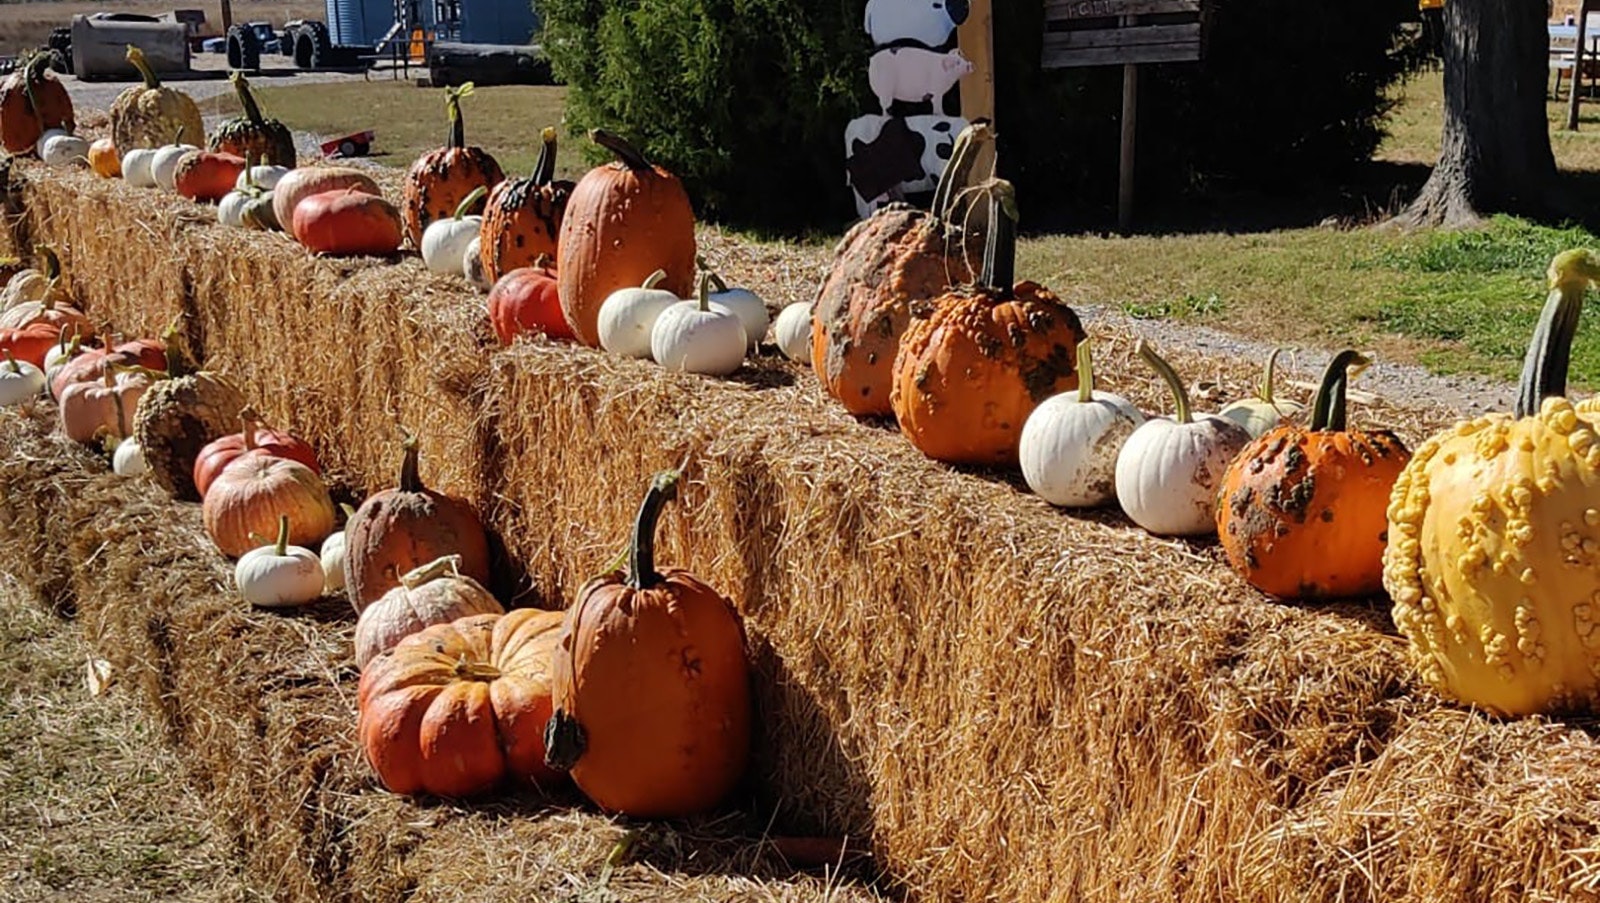 There's a lot more for kids to do than the corn maze at Ellis' Harvest Home.